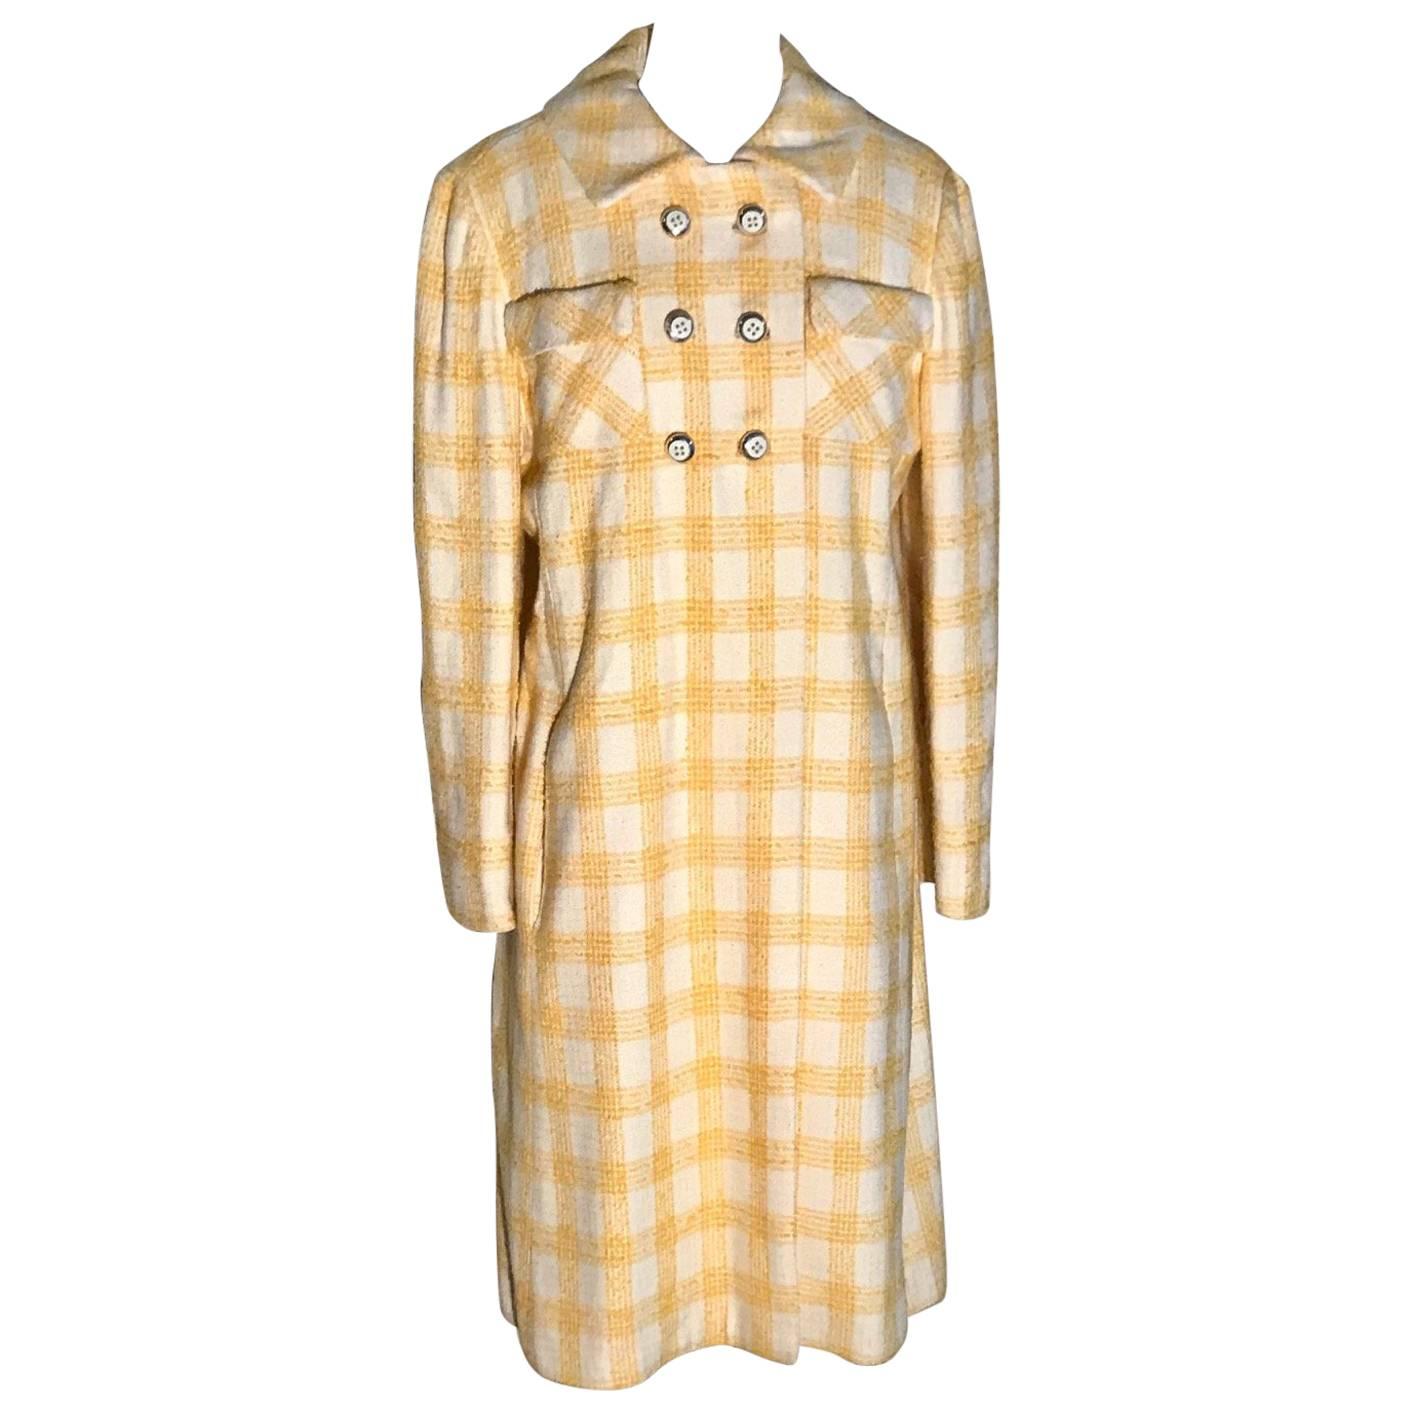 1960s Riva for Miss Magnin by I Magnin Yellow and White Plaid Vintage Coat 